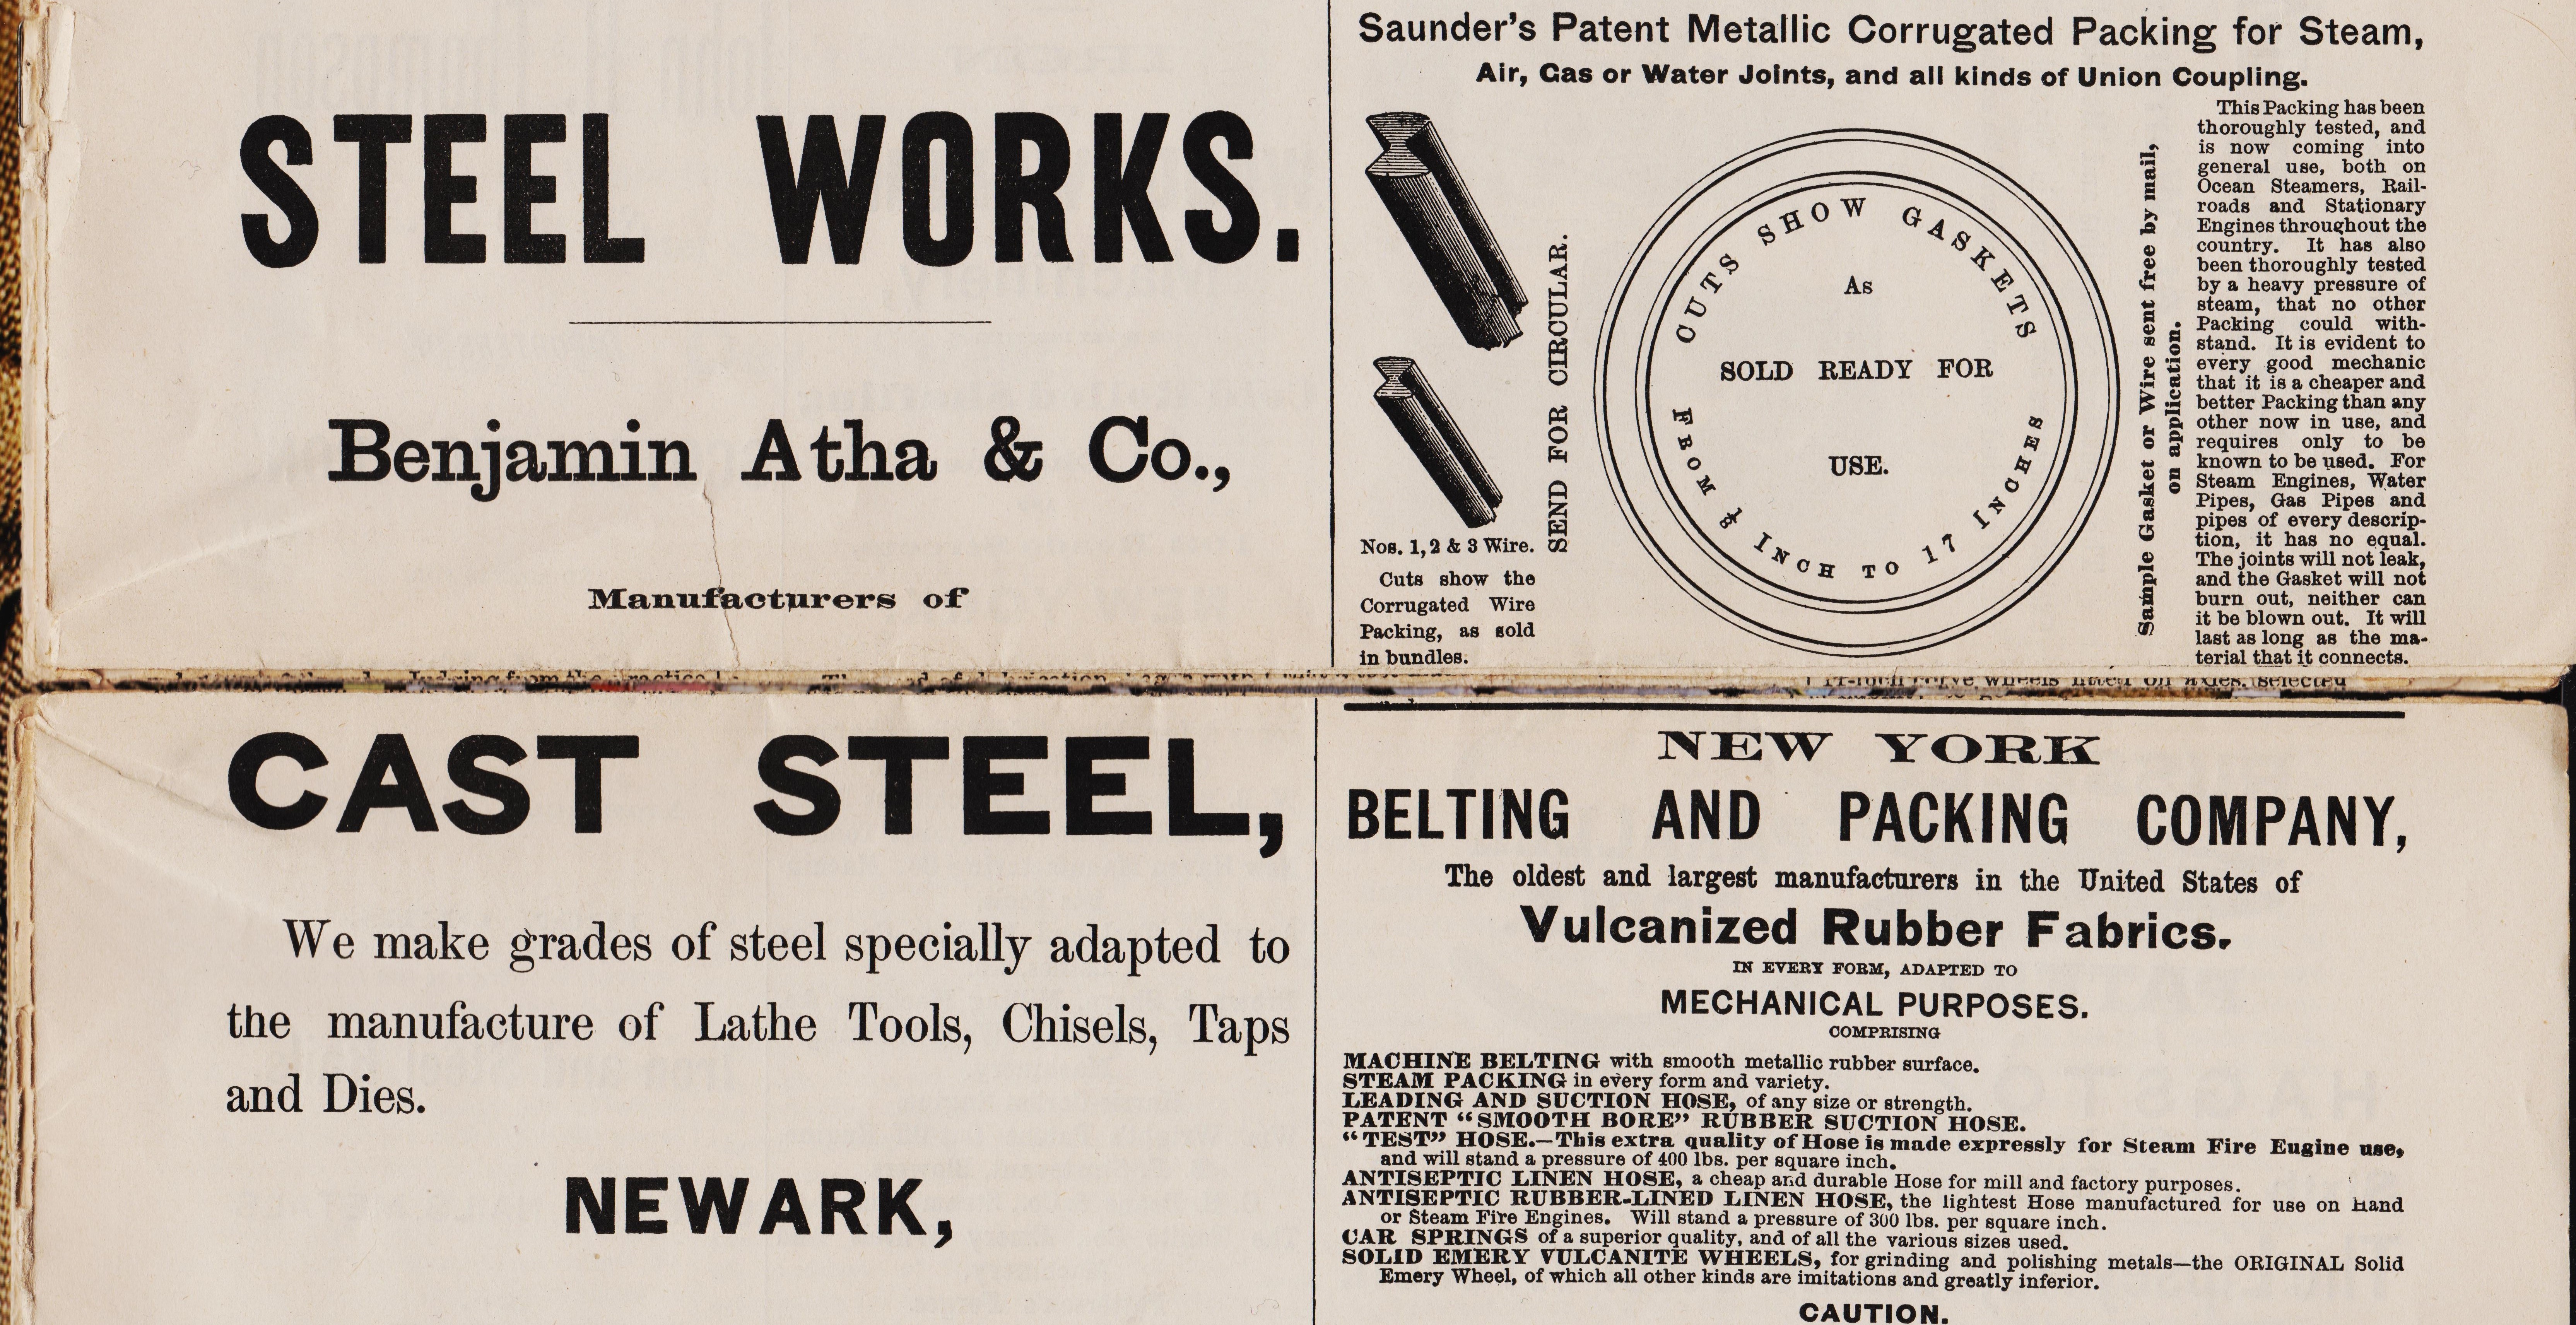 https://antiquemachinery.com/images-2020/American_Machinist-March-15-1877-First-Issue-pg-13-mid.jpeg